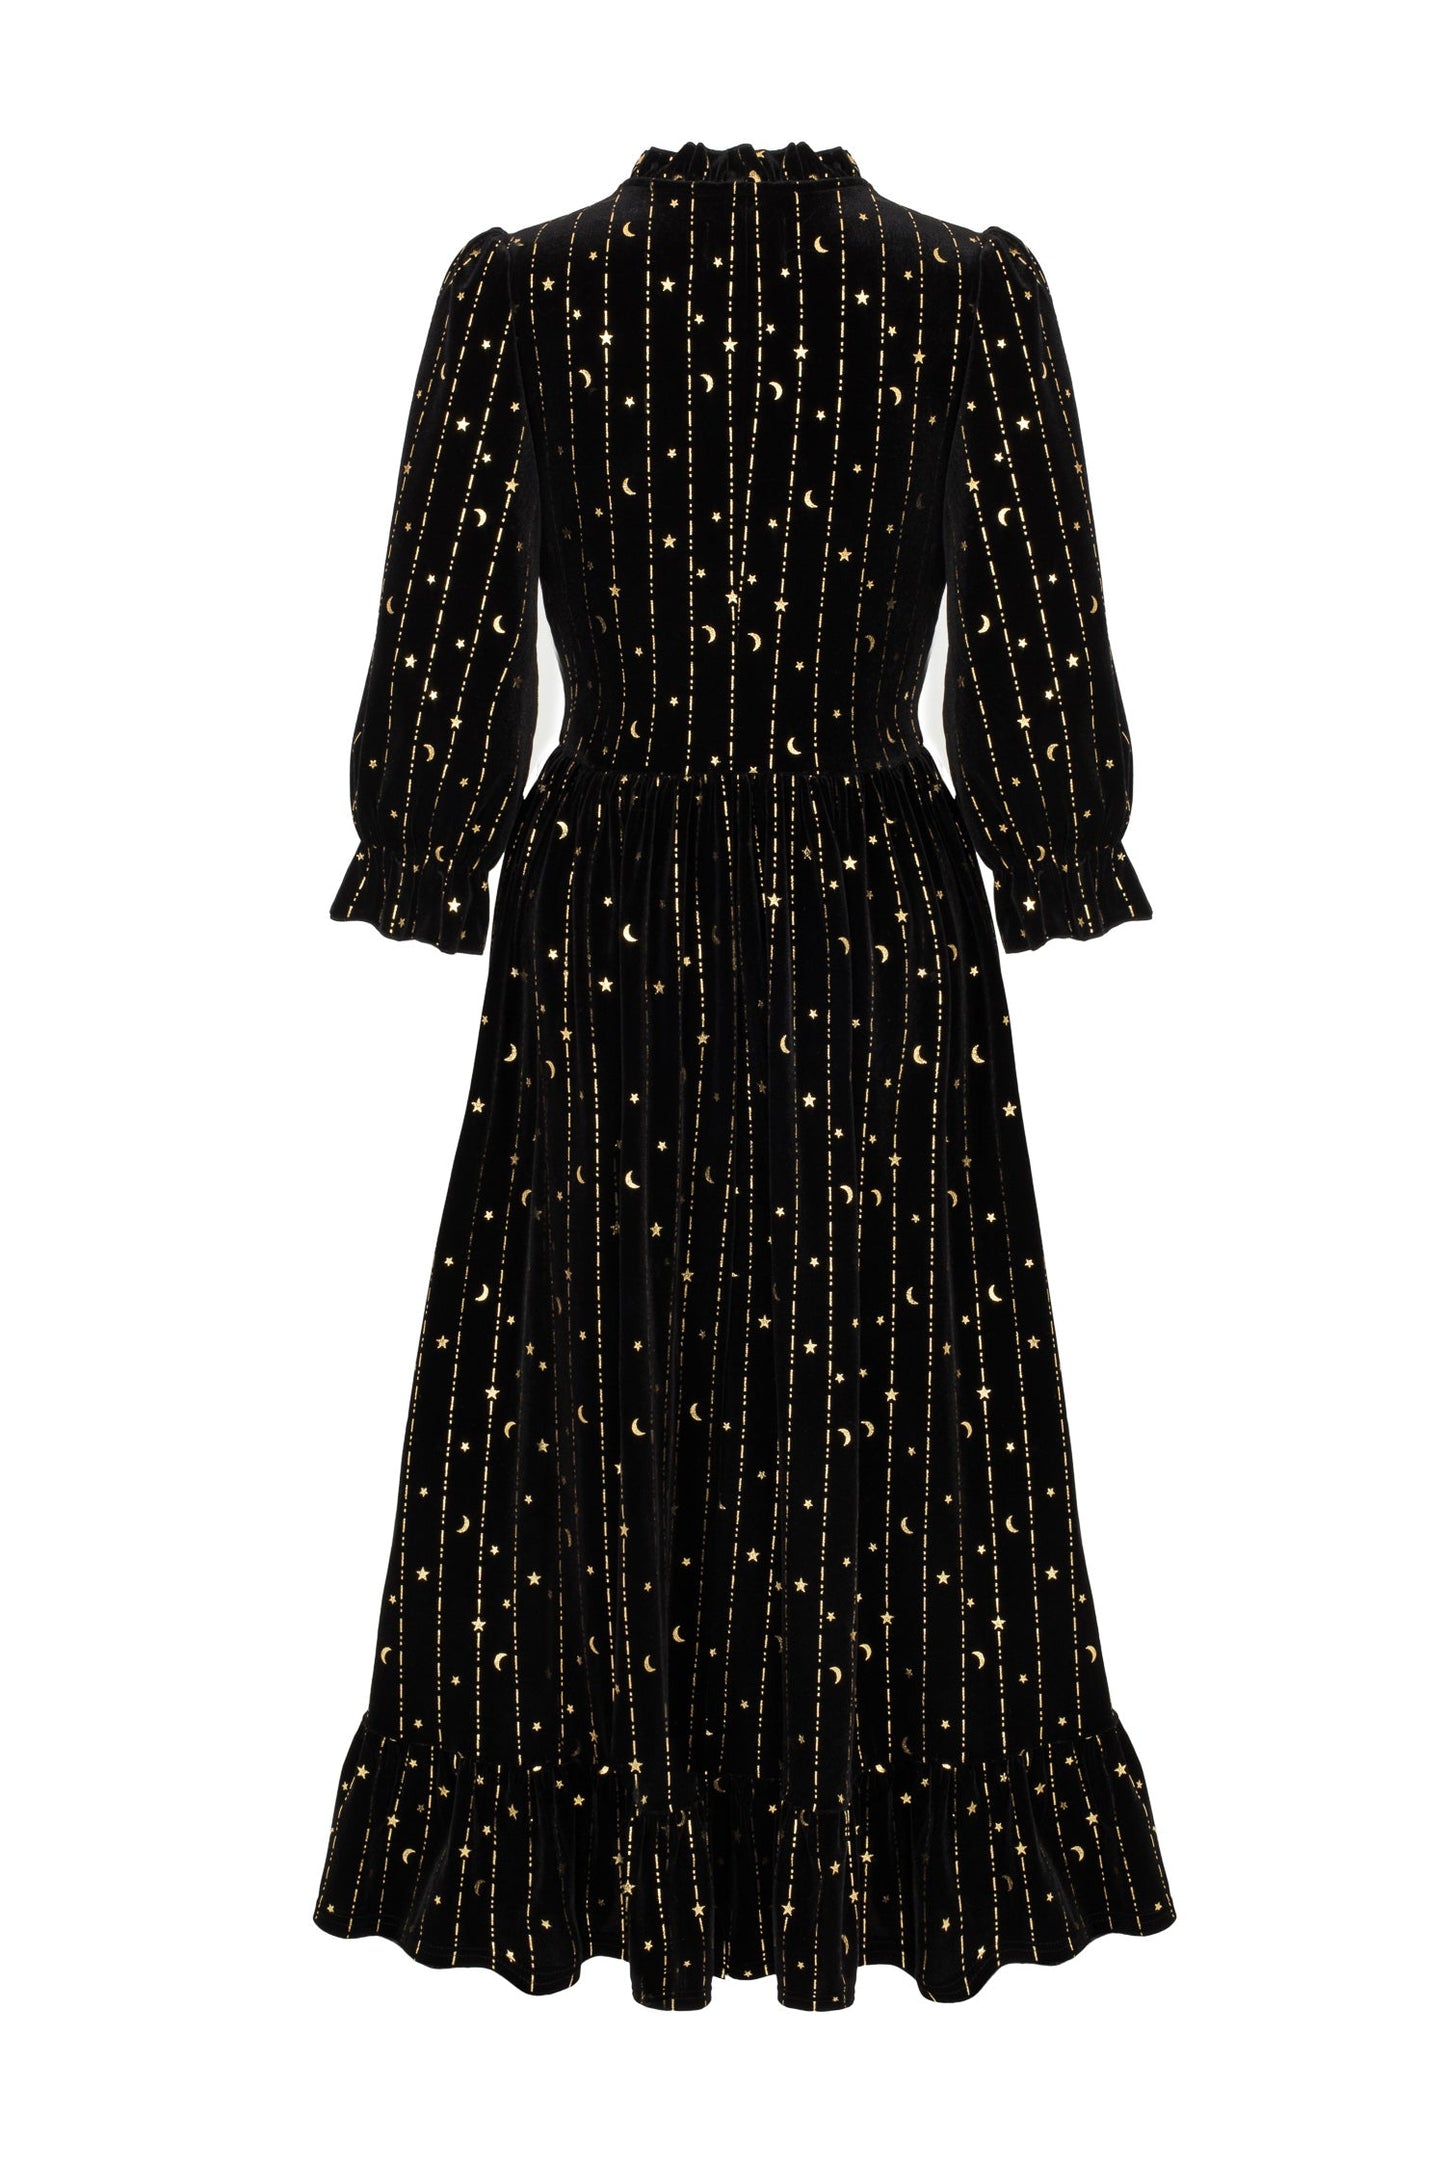 Galactica Dress in Black by Hell Bunny